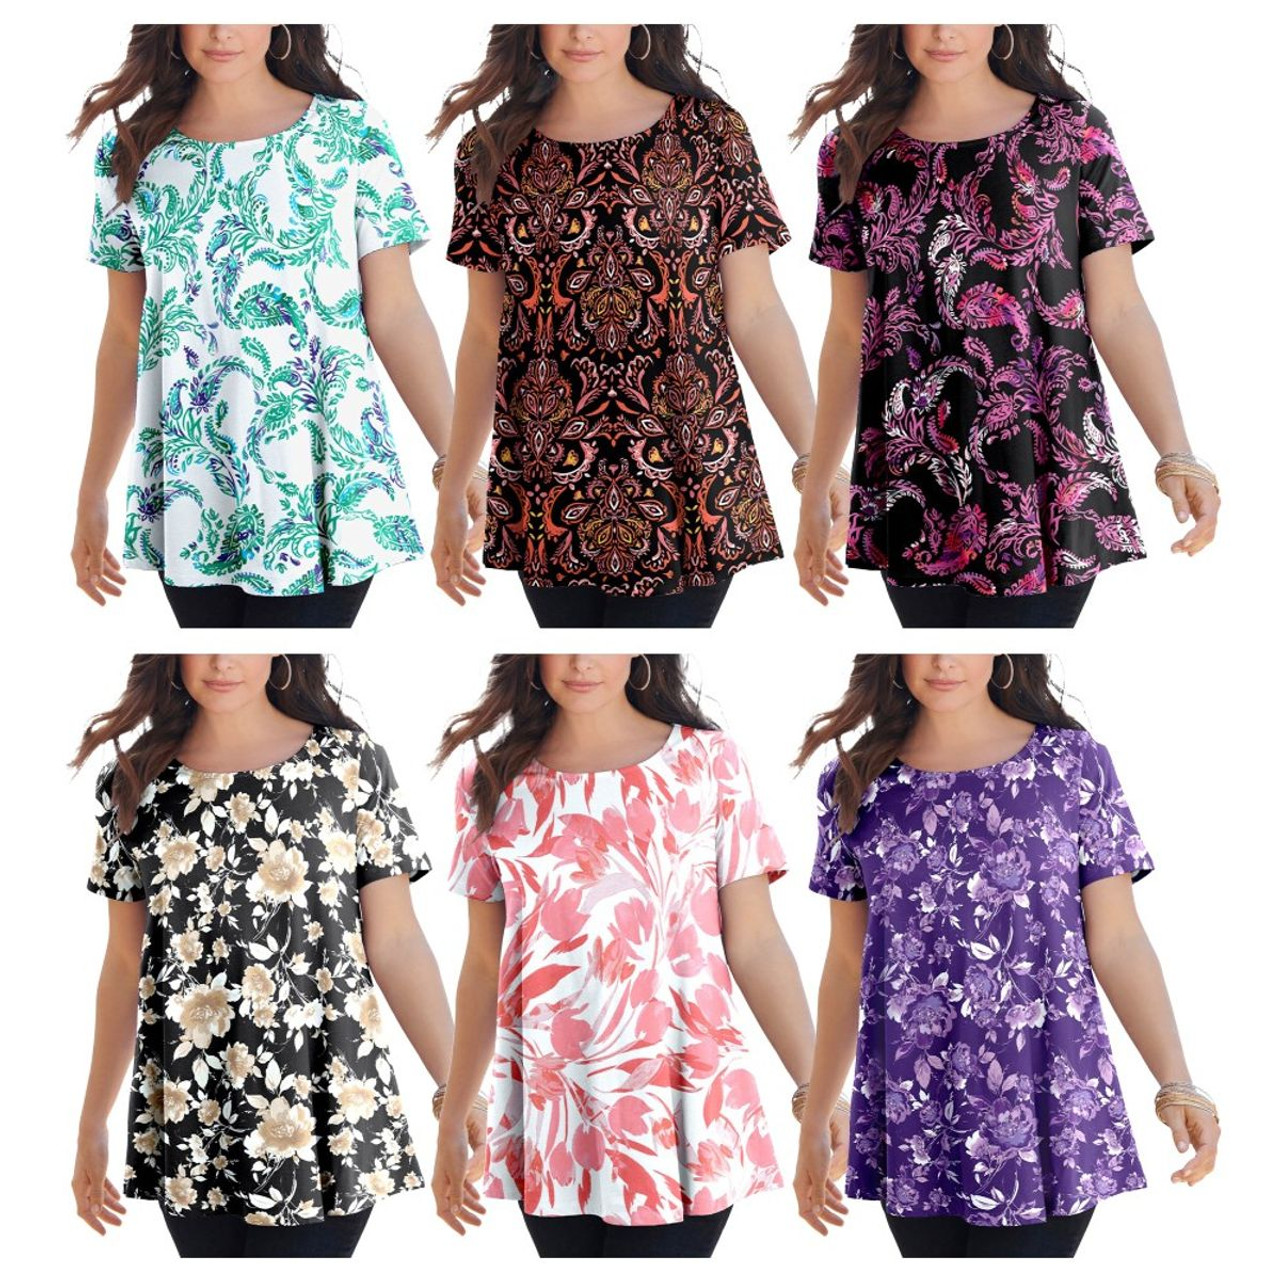 Women’s Printed Short Sleeve Casual Crew Neck T-Shirts (4-Pack) product image